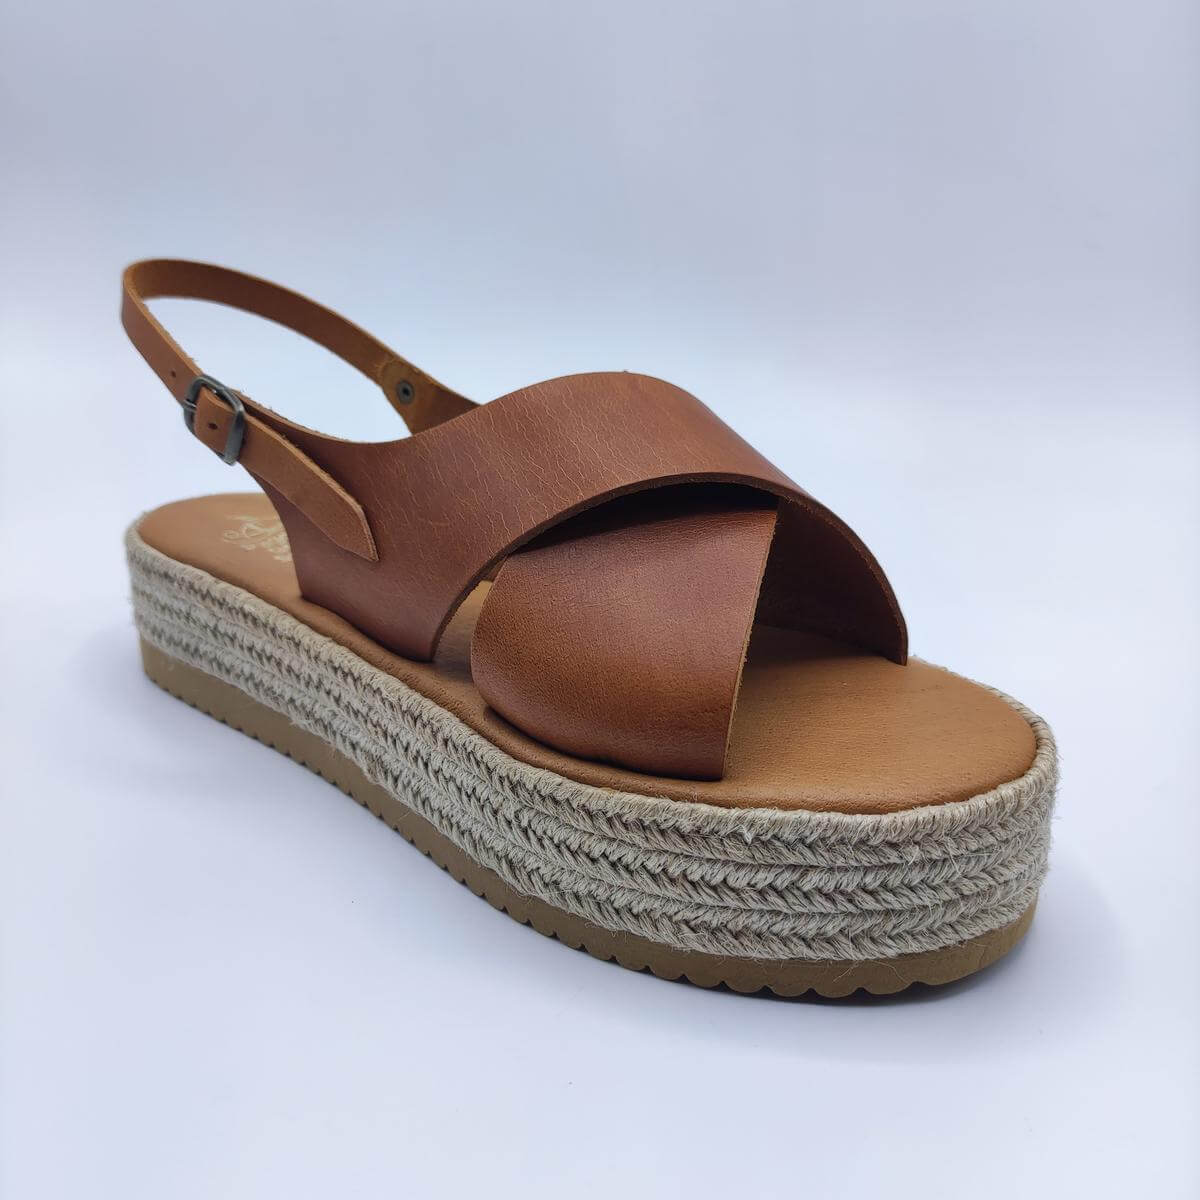 Amiti Platform leather sandal criss-cross with back strap Leather Sandals